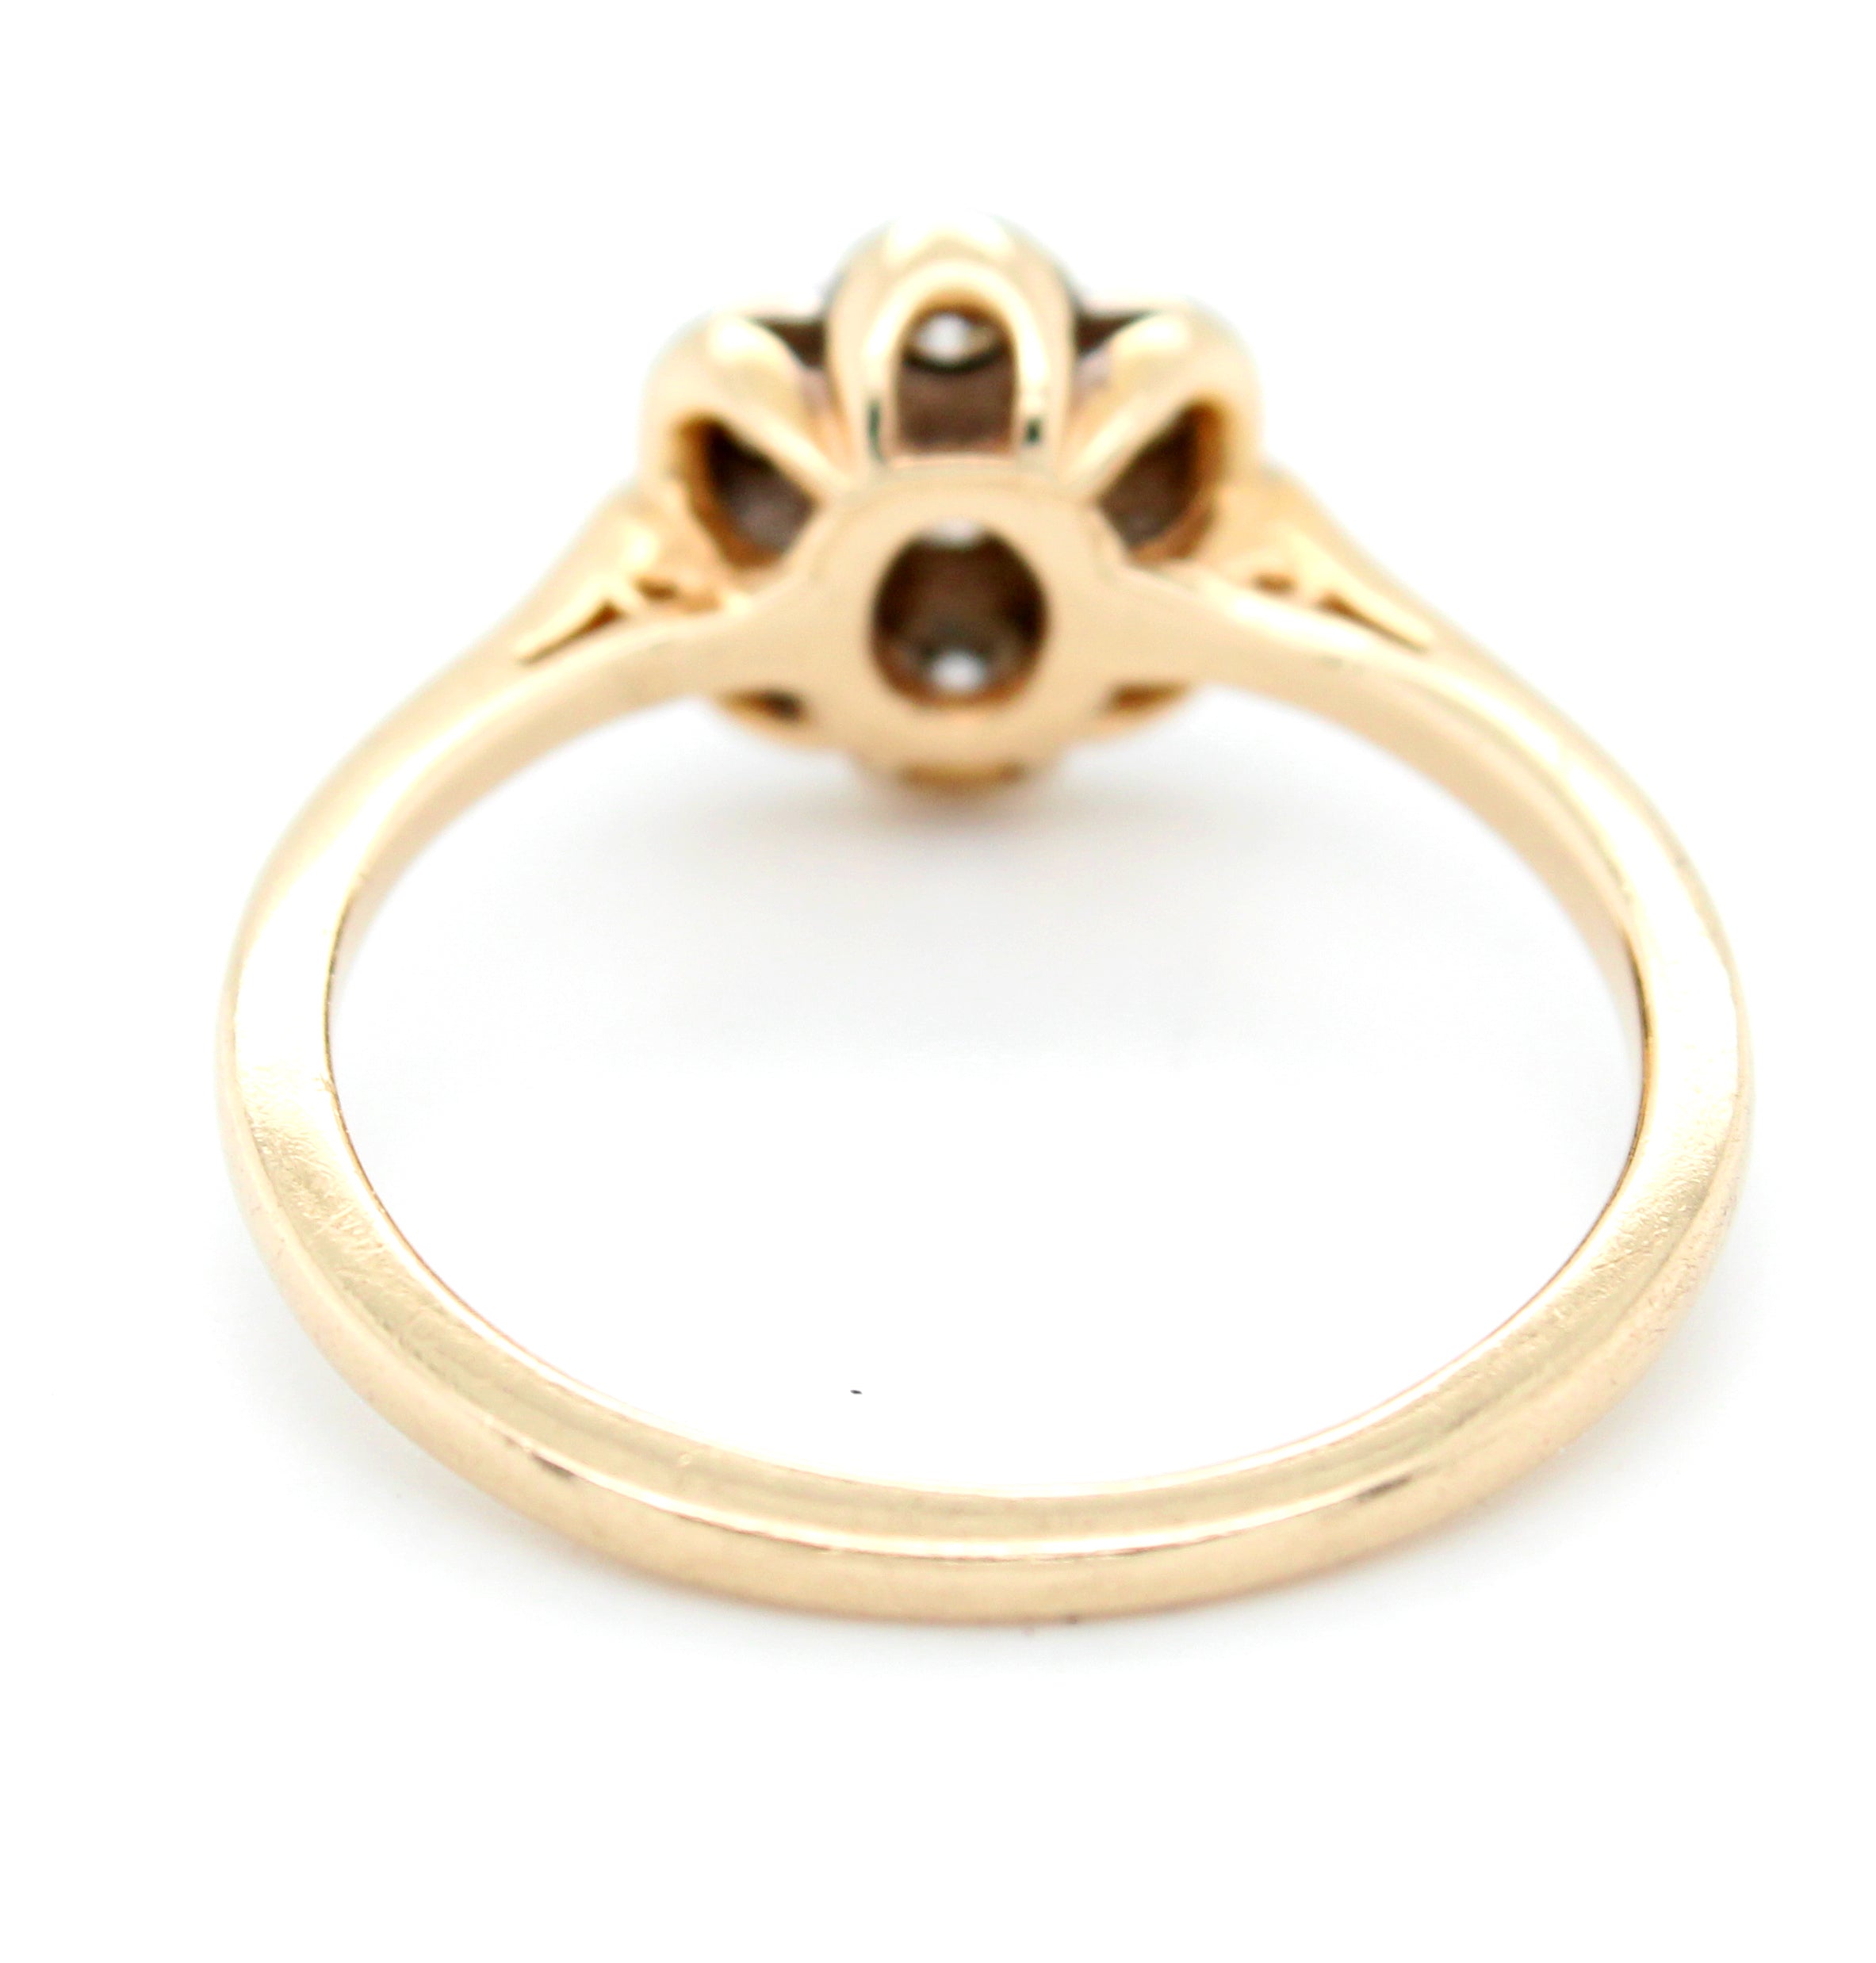 Vintage 0.50ctw Diamond Flower Ring in 14k Yellow Gold | Size 7.25